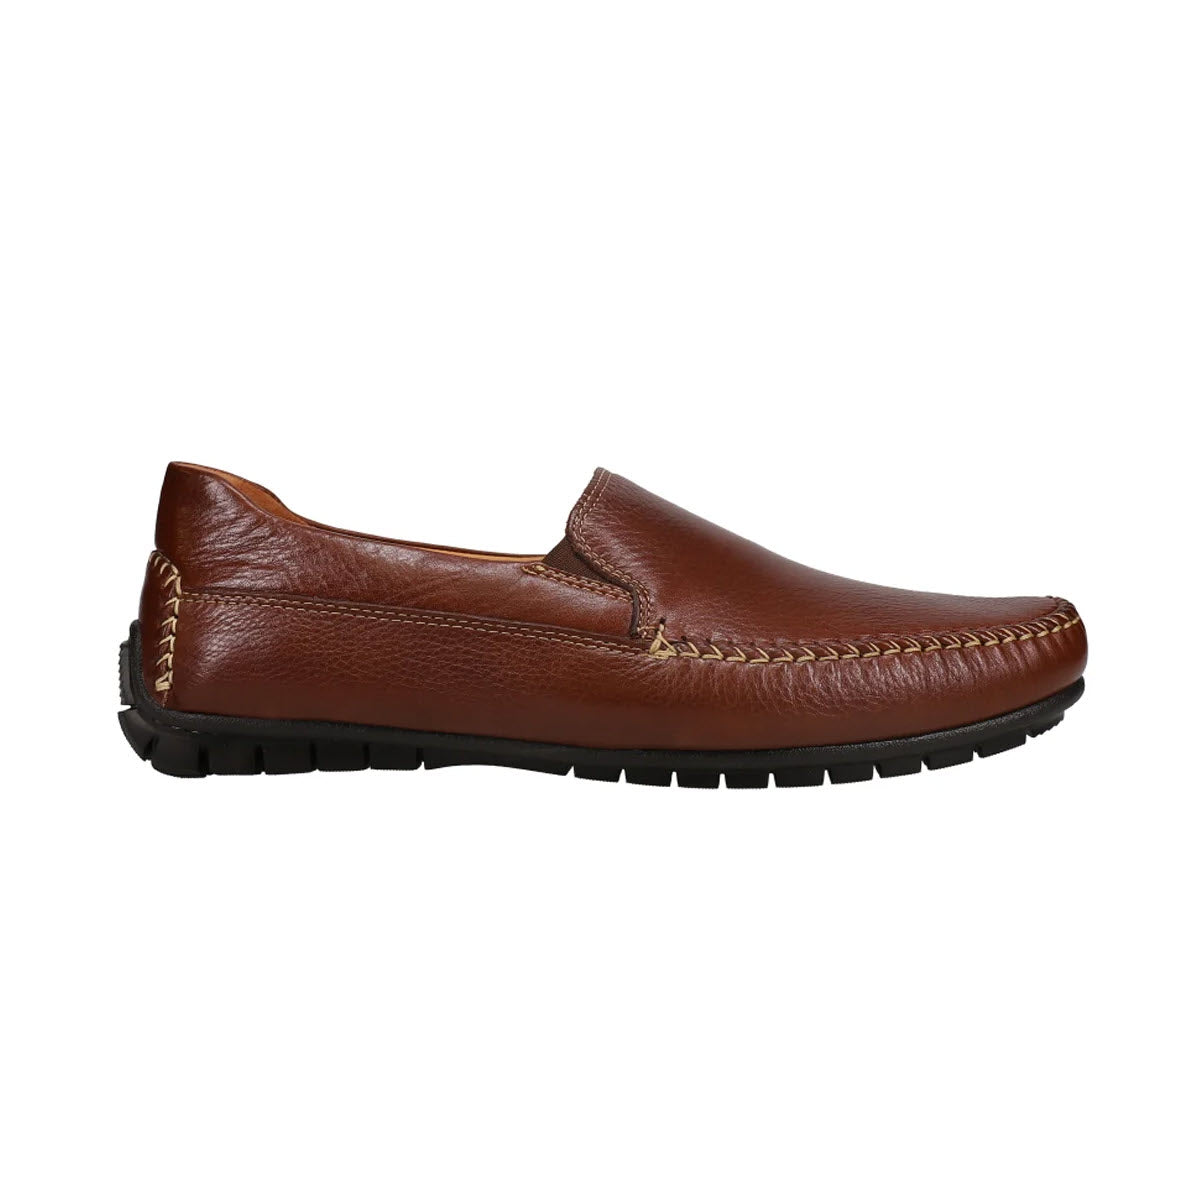 A Johnston & Murphy Cort Whipstitch Venetian Mahogany slip-on loafer with genuine moccasin construction and a black rubber sole, isolated on a white background.